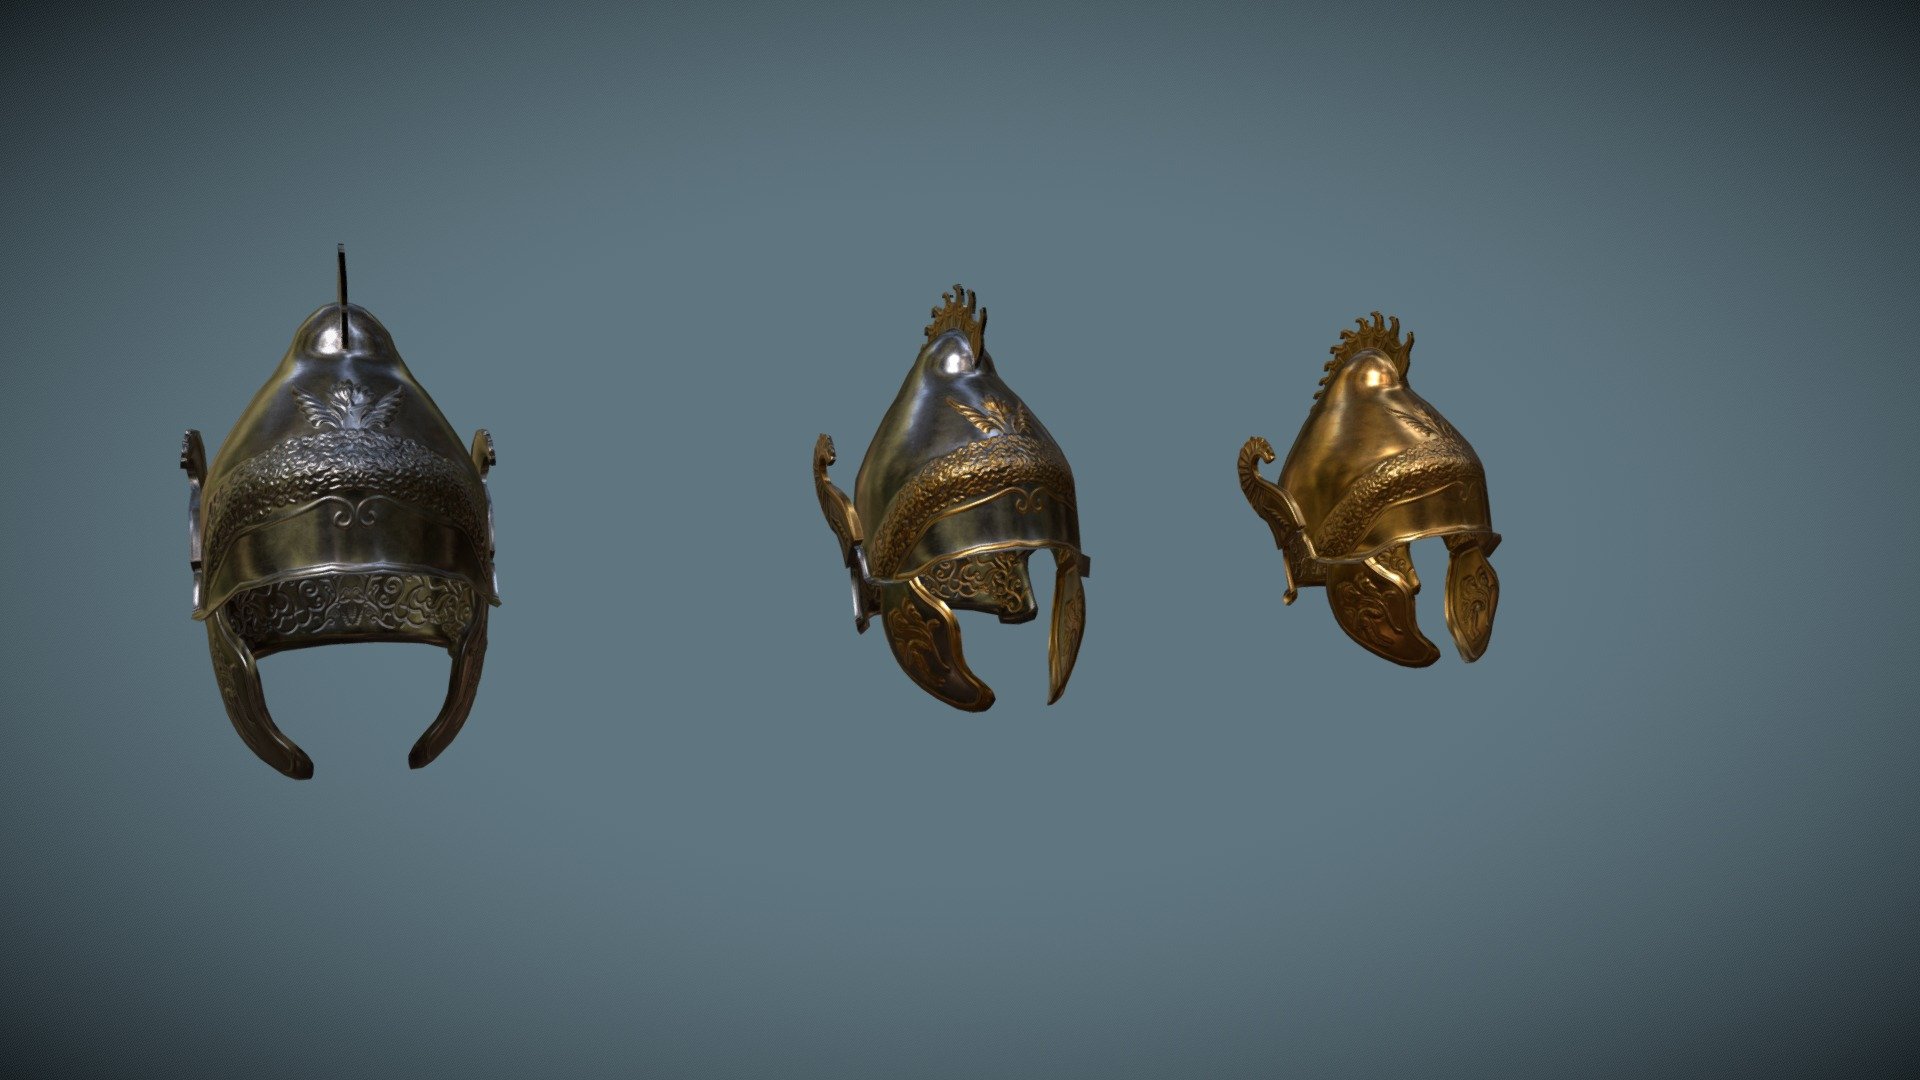 Helmet of the Attico-Phrygian type: Iron and bronze variations, and an additional version with iron base and details painted in bronze.

Made for the RIR: Imperium Surrectum mod, for the game Rome Total War Remastered.

Made in Blender - 3384 vertices

The process consists of modelling a low poly version, from which a copy is made with a very high dense mesh where details are sculpted in, later baked onto its low poly counterpart.

The different colours are textured painted in - Attico-Phrygian Helmets - 3D model by João Paulo (@Grimbold) 3d model